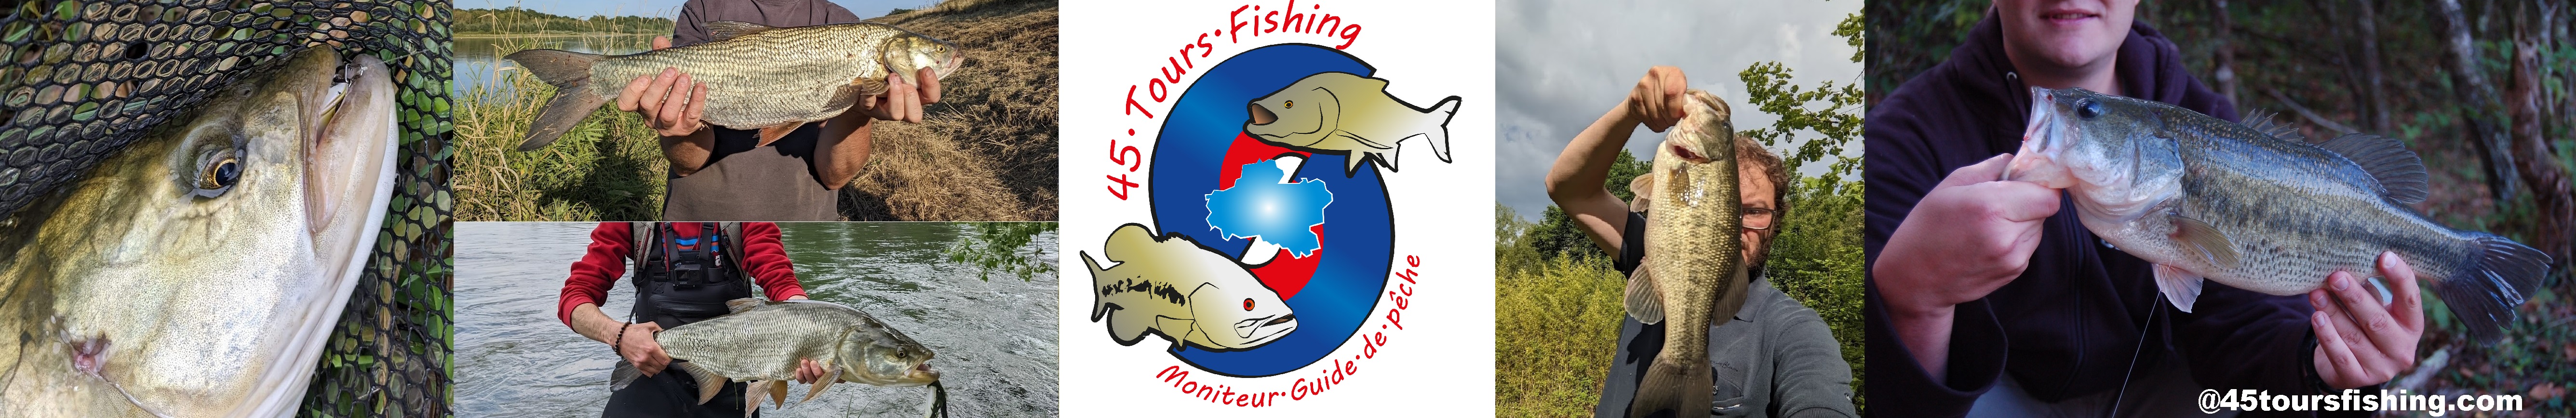 45 Tours Fishing - Moniteur Guide de pêche null France null null null null